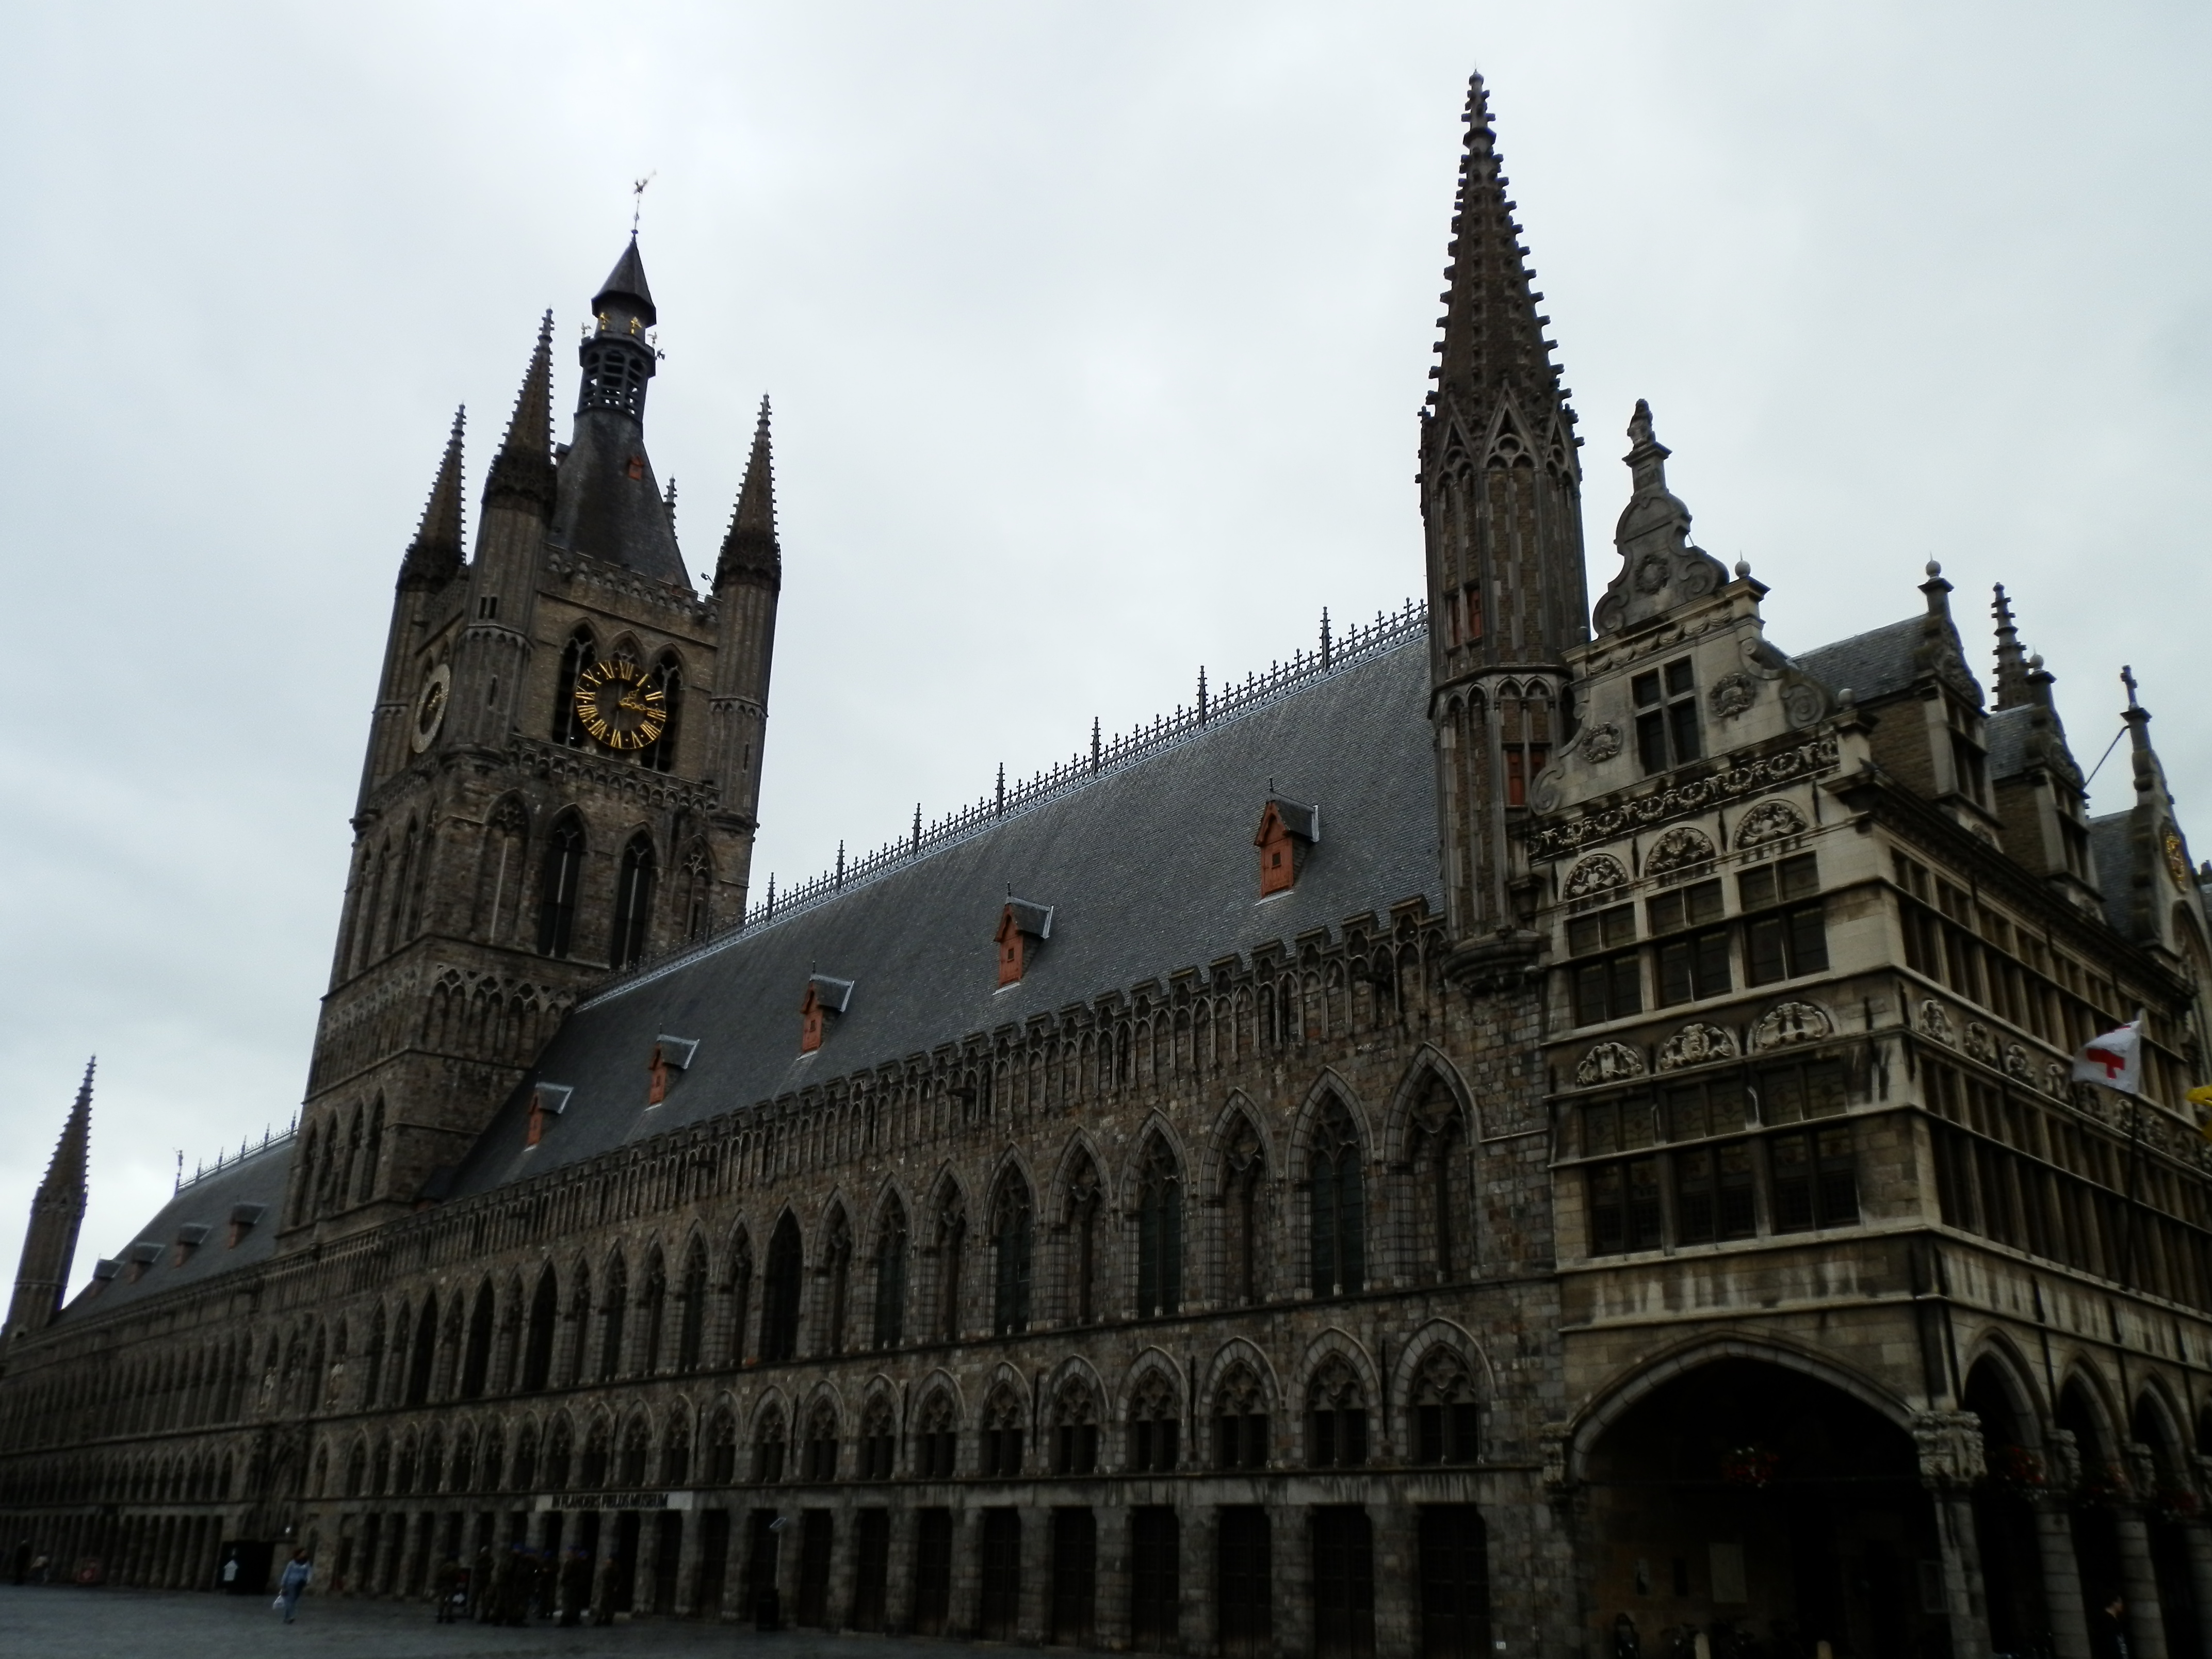 The Lakenhalle (Cloth Hall) of Ypres (author's photo).